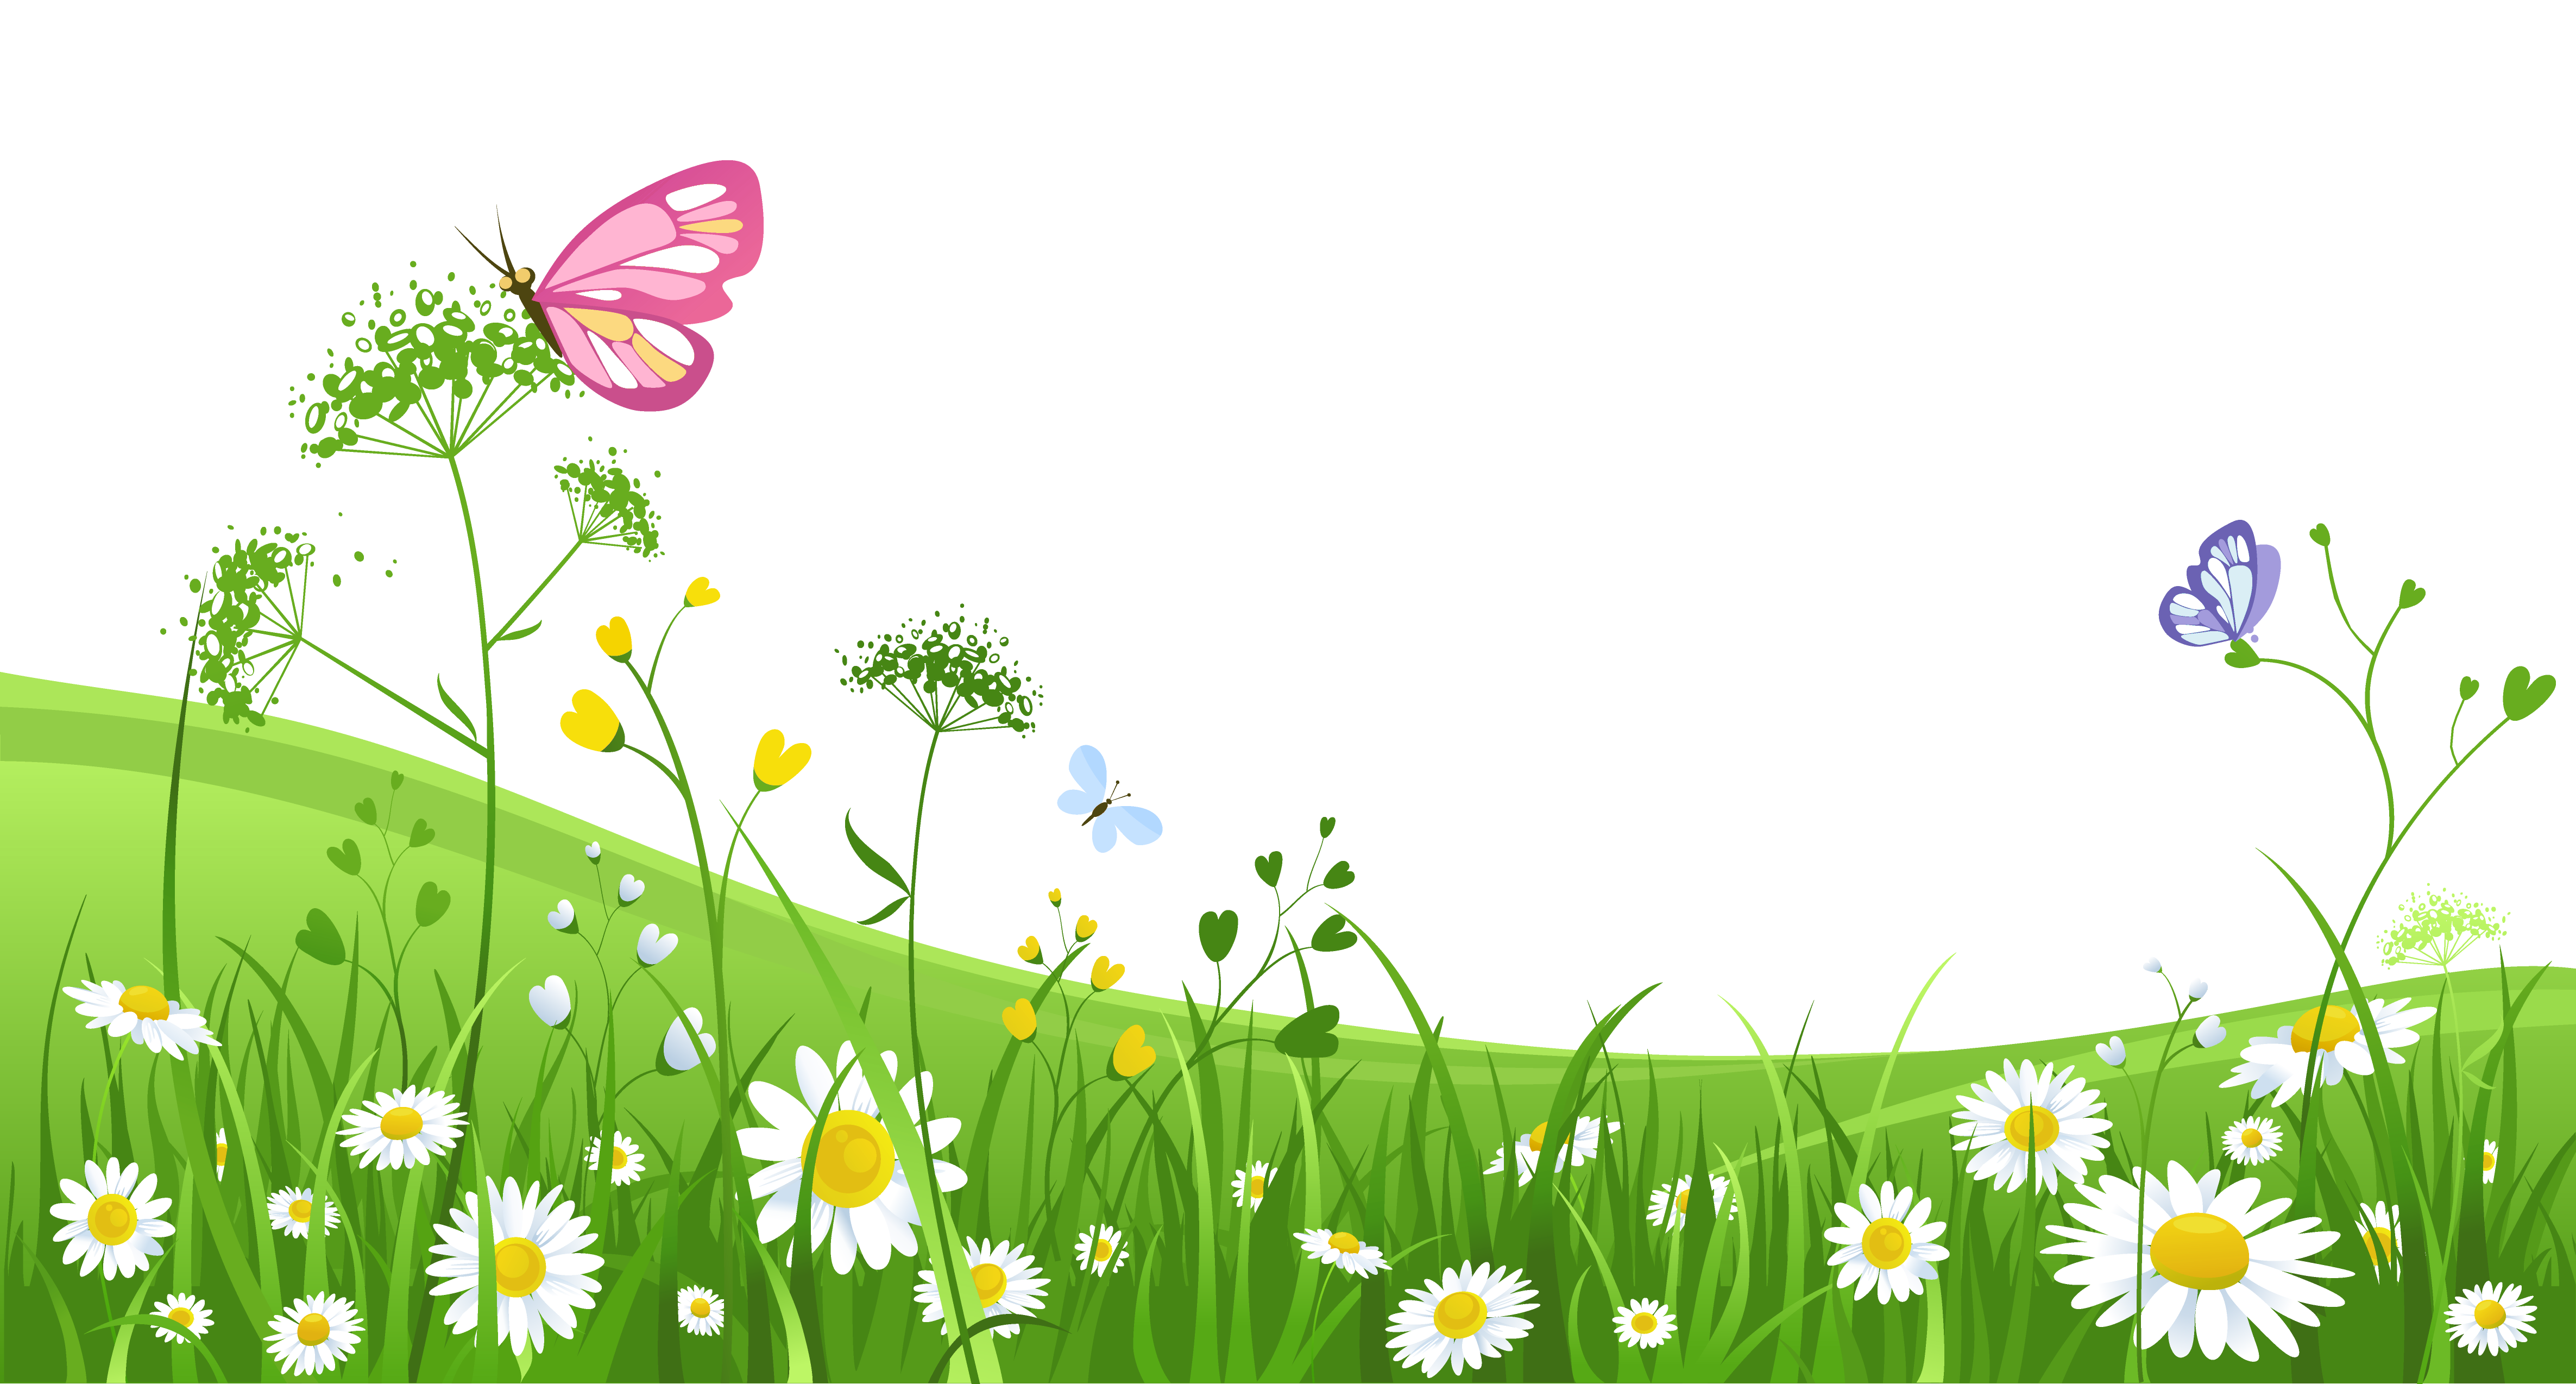 With butterflies picture gallery. Clipart grass kid